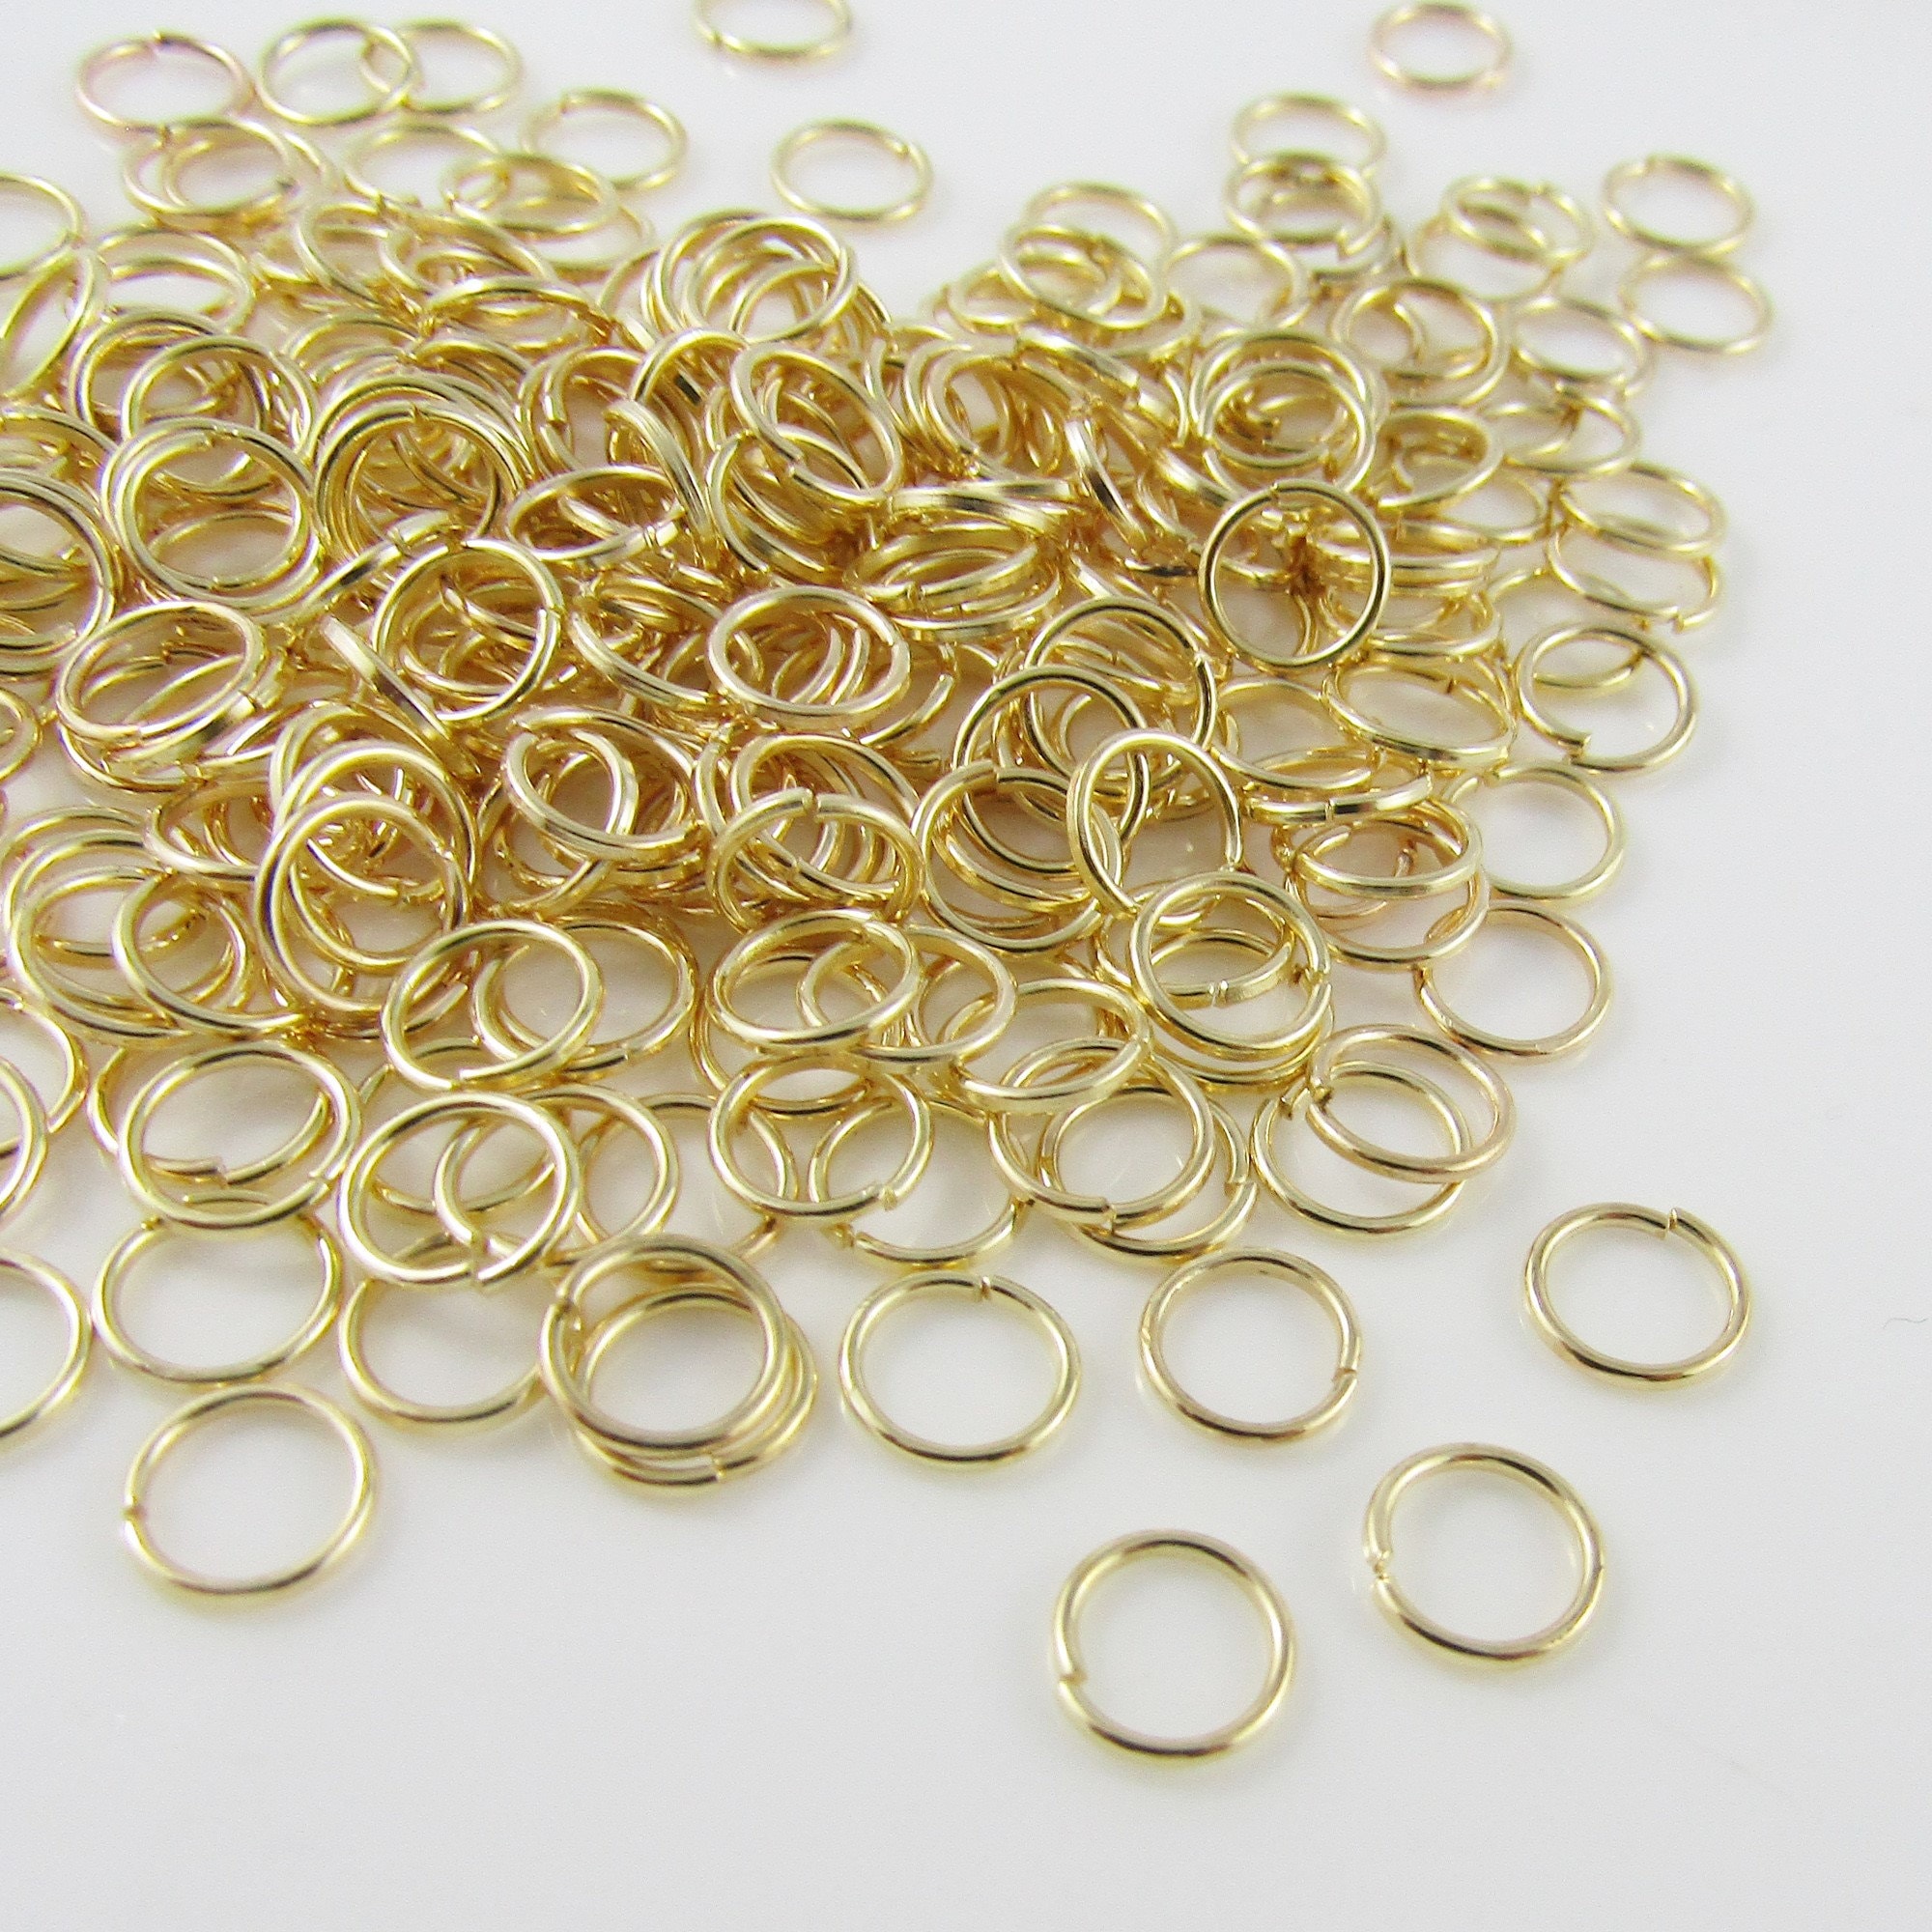 Bulk 360 Pieces of 6x0.7mm Light Gold Jump Rings Open Jumprings Findings -   Norway